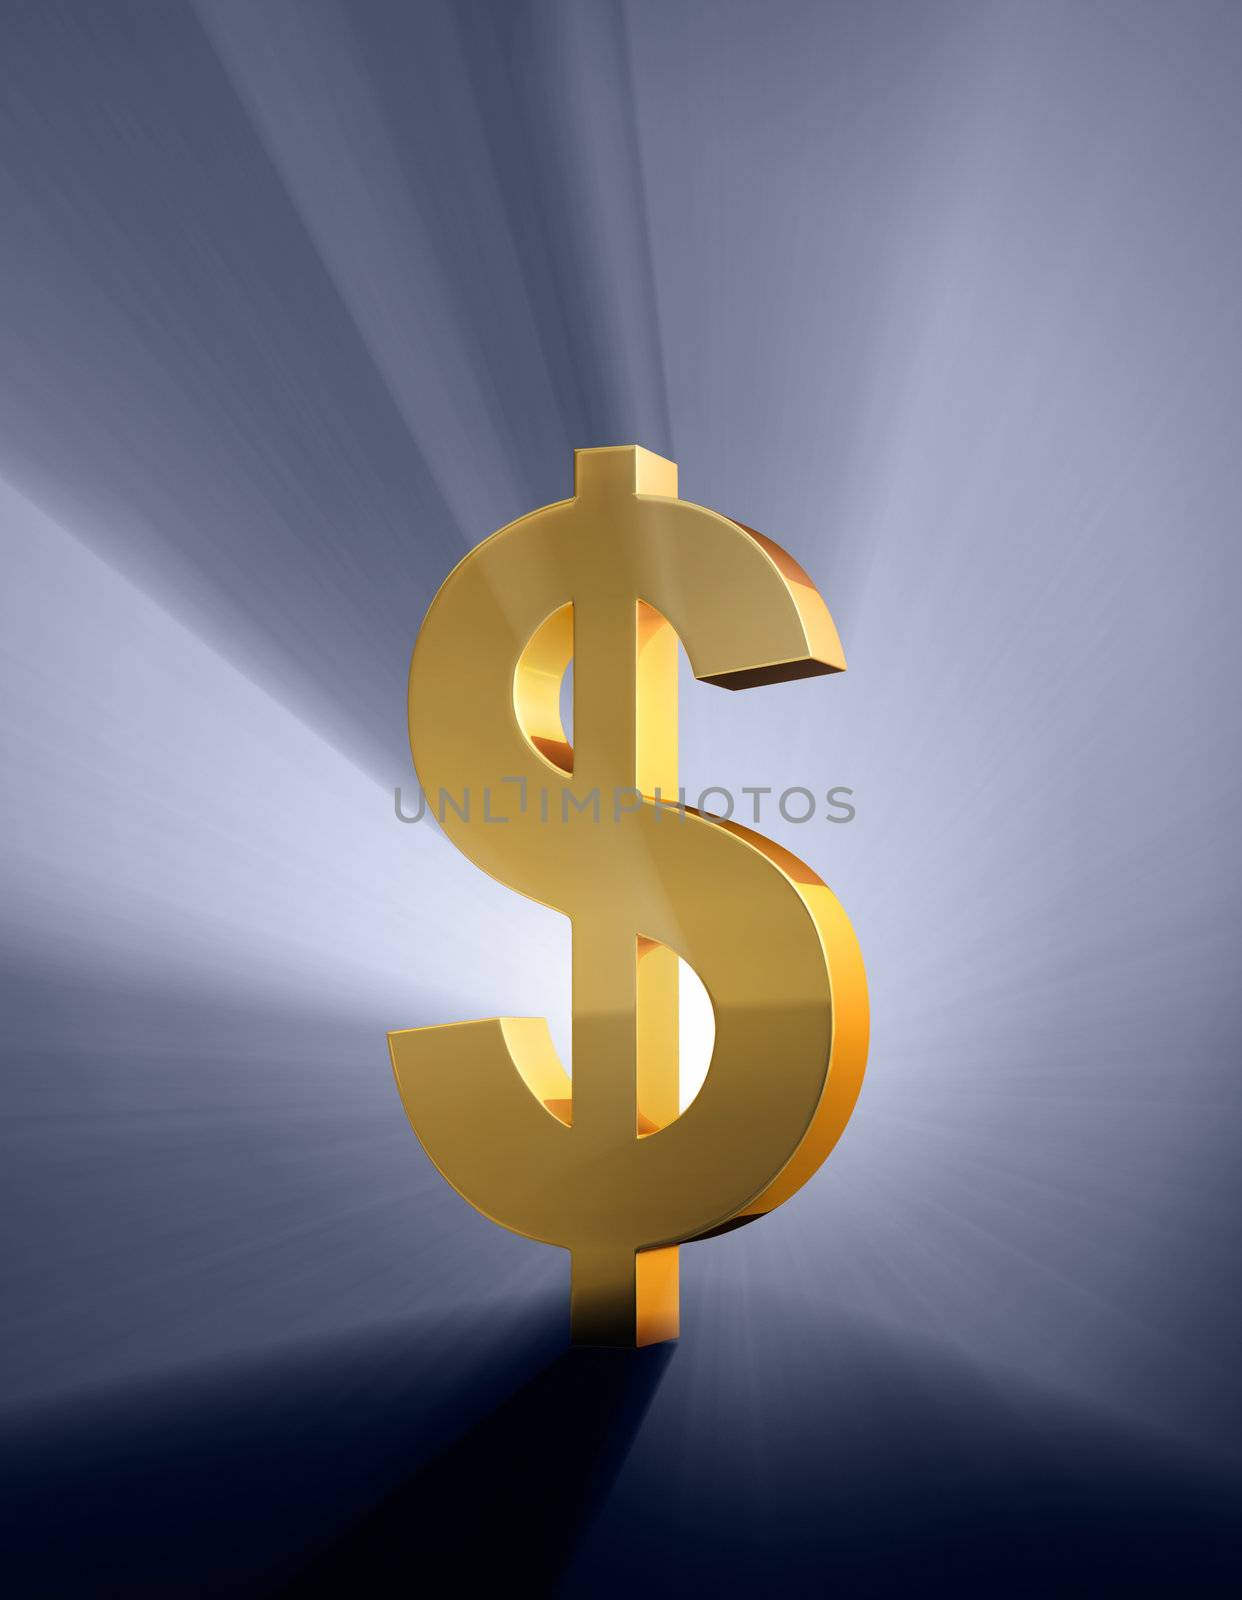 A gold dollar sign on a dark blue background brilliantly backlight with light rays shining through.
